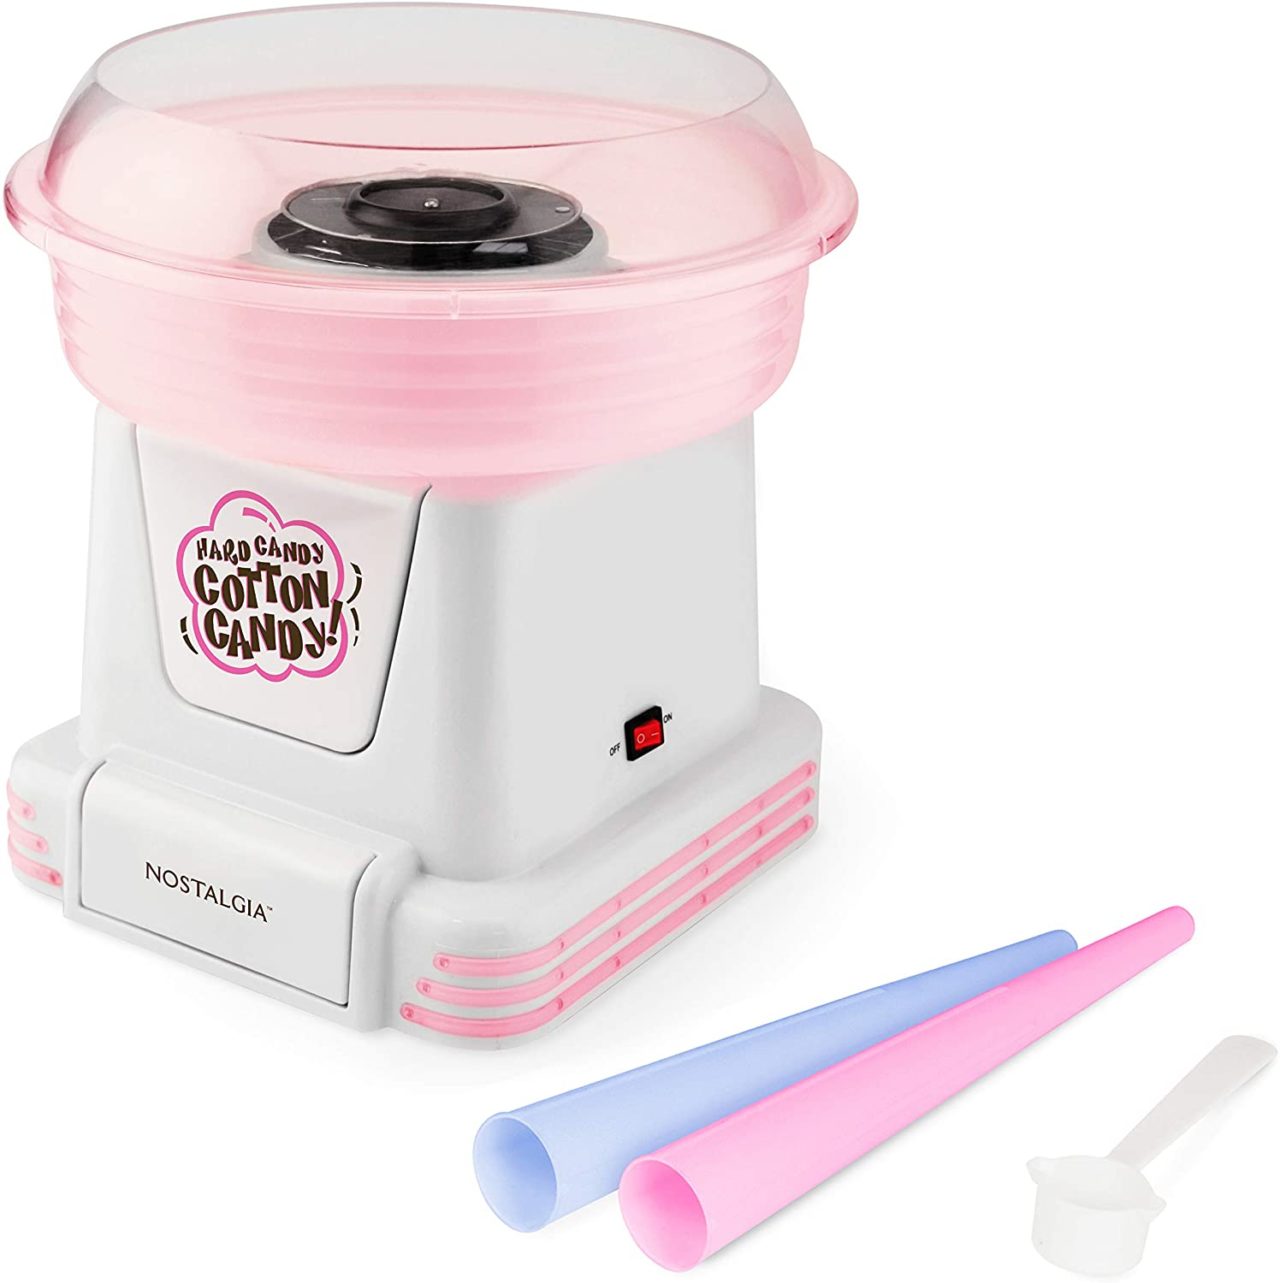 Cotton Candy Machines: Which one is the best buy? - Glutto Digest